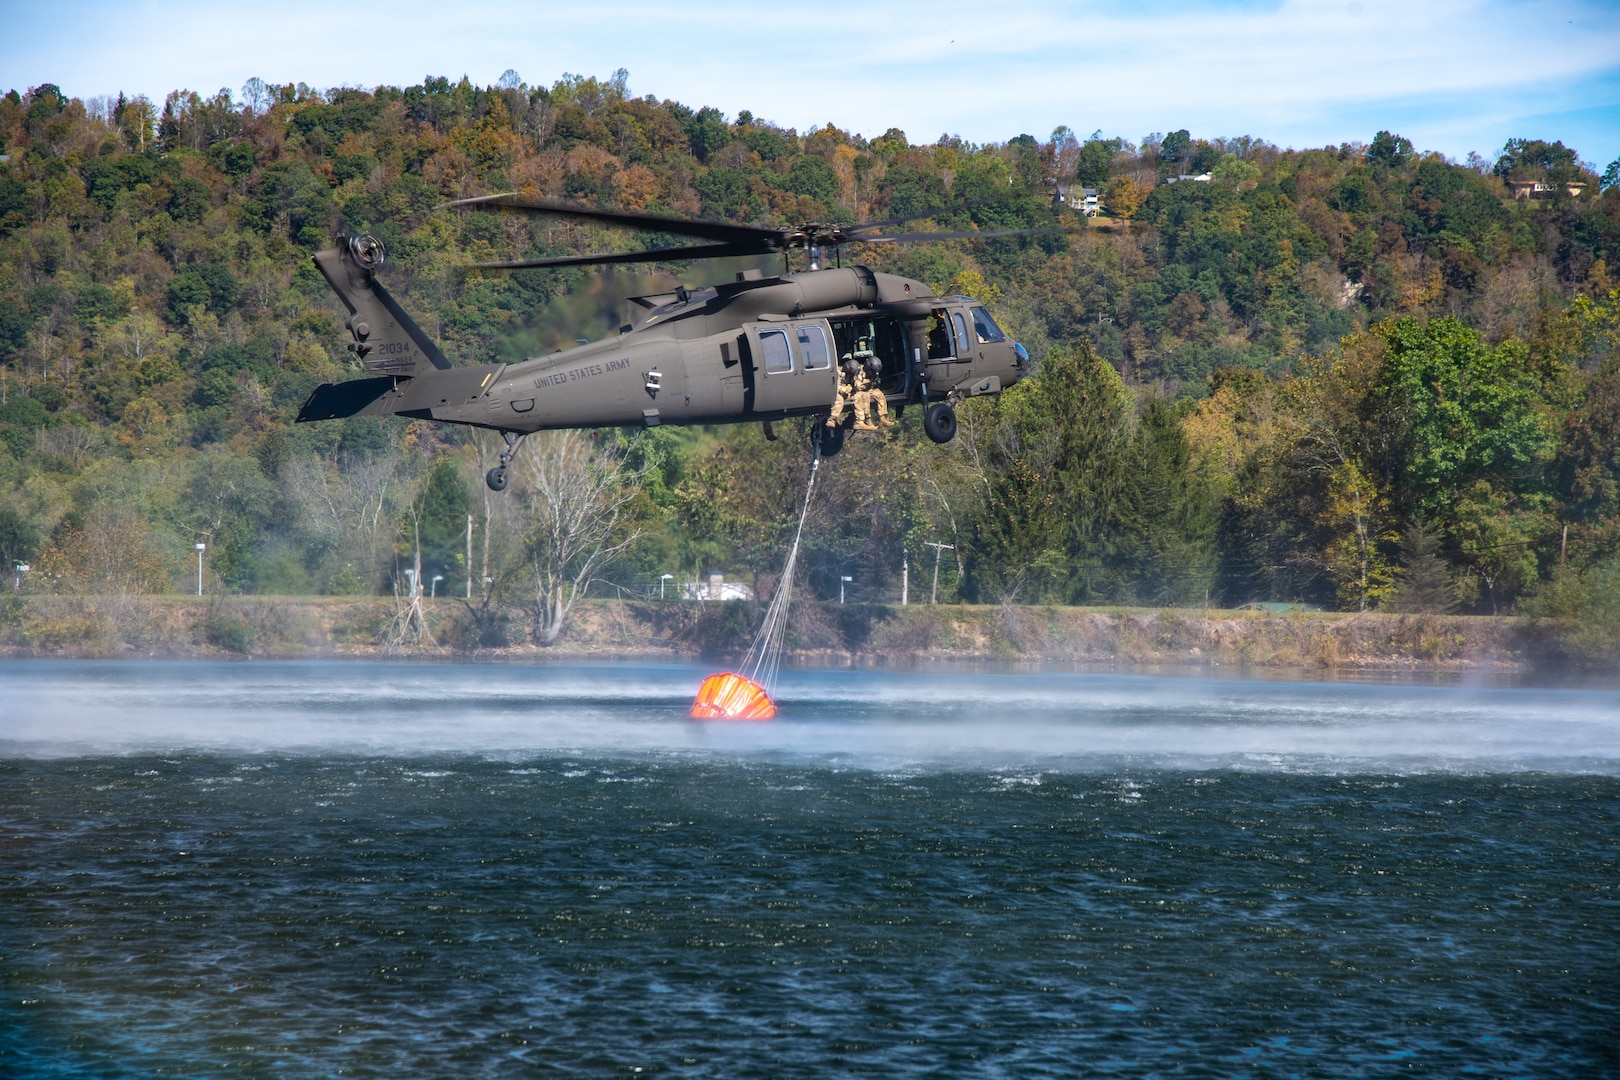 Members of West Virginia Army National Guard Company C, 1st Battalion, 150th Aviation Regiment, practice using a helicopter bucket to fight fires at Camp Dawson, West Virginia, Oct. 10, 2019. The training prepares aircrew members to respond with civilian firefighting agencies to wildfires.